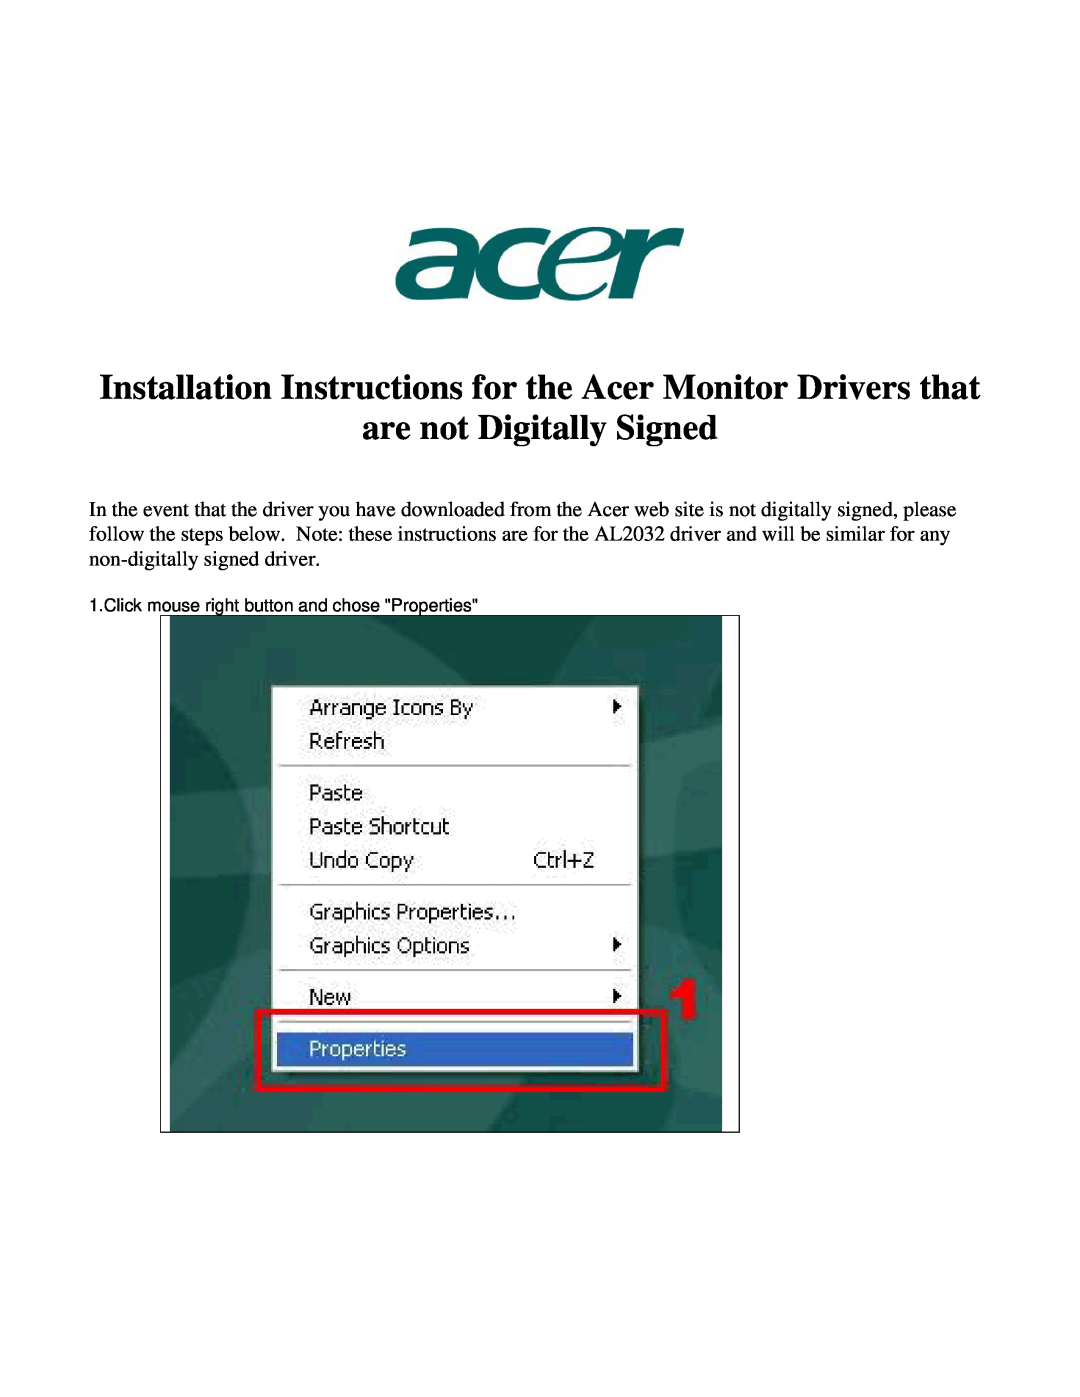 Acer AL2032 installation instructions Click mouse right button and chose Properties, are not Digitally Signed 